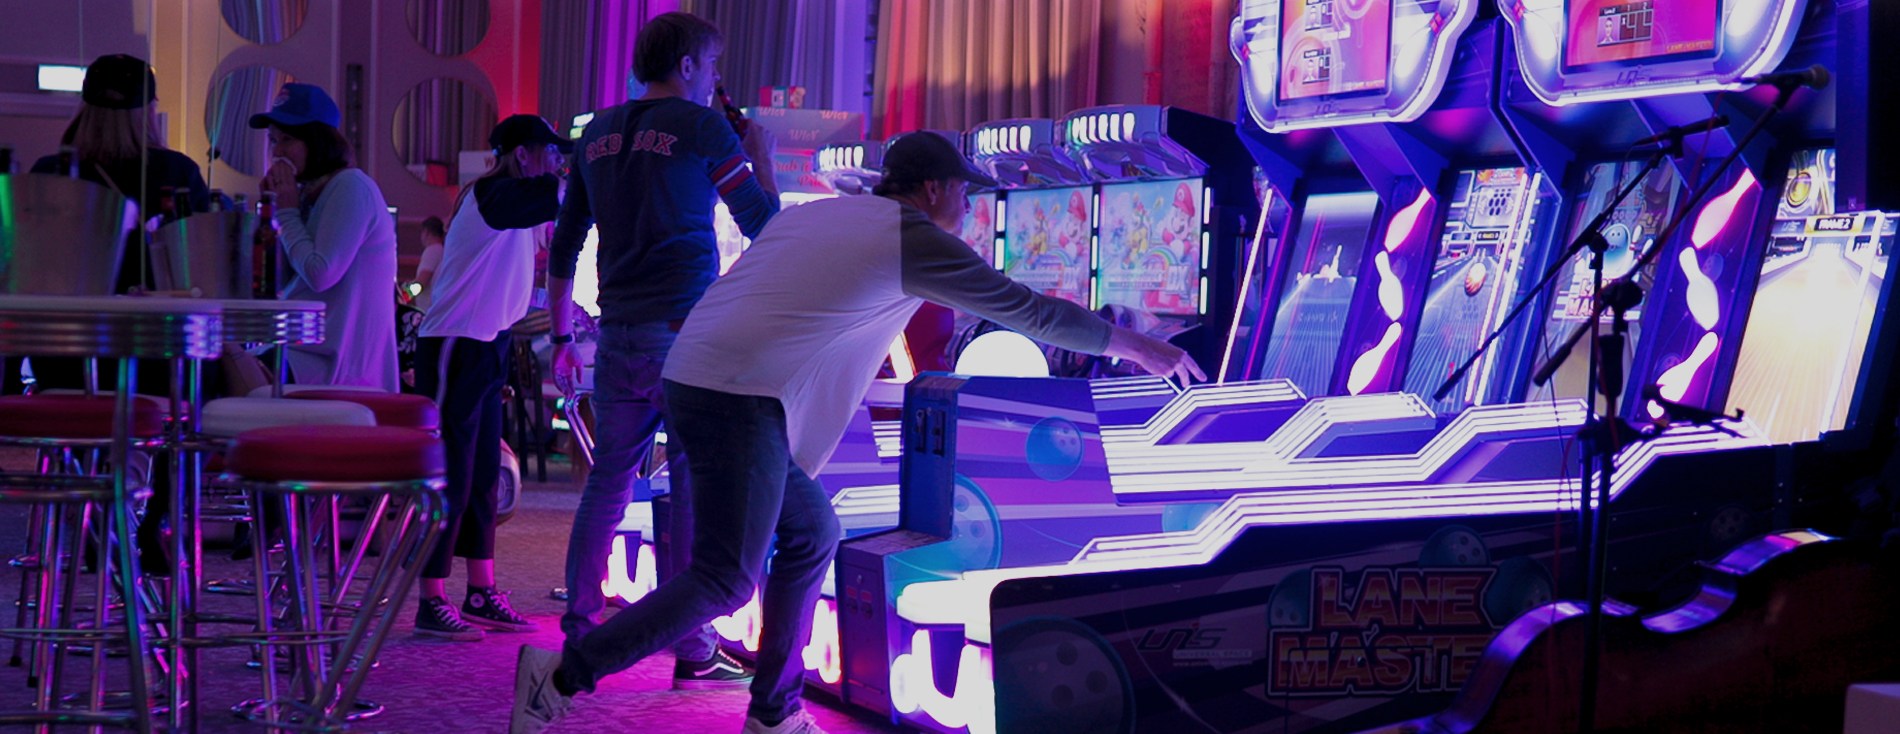 Lane Master Bowling Arcade game being played at a party